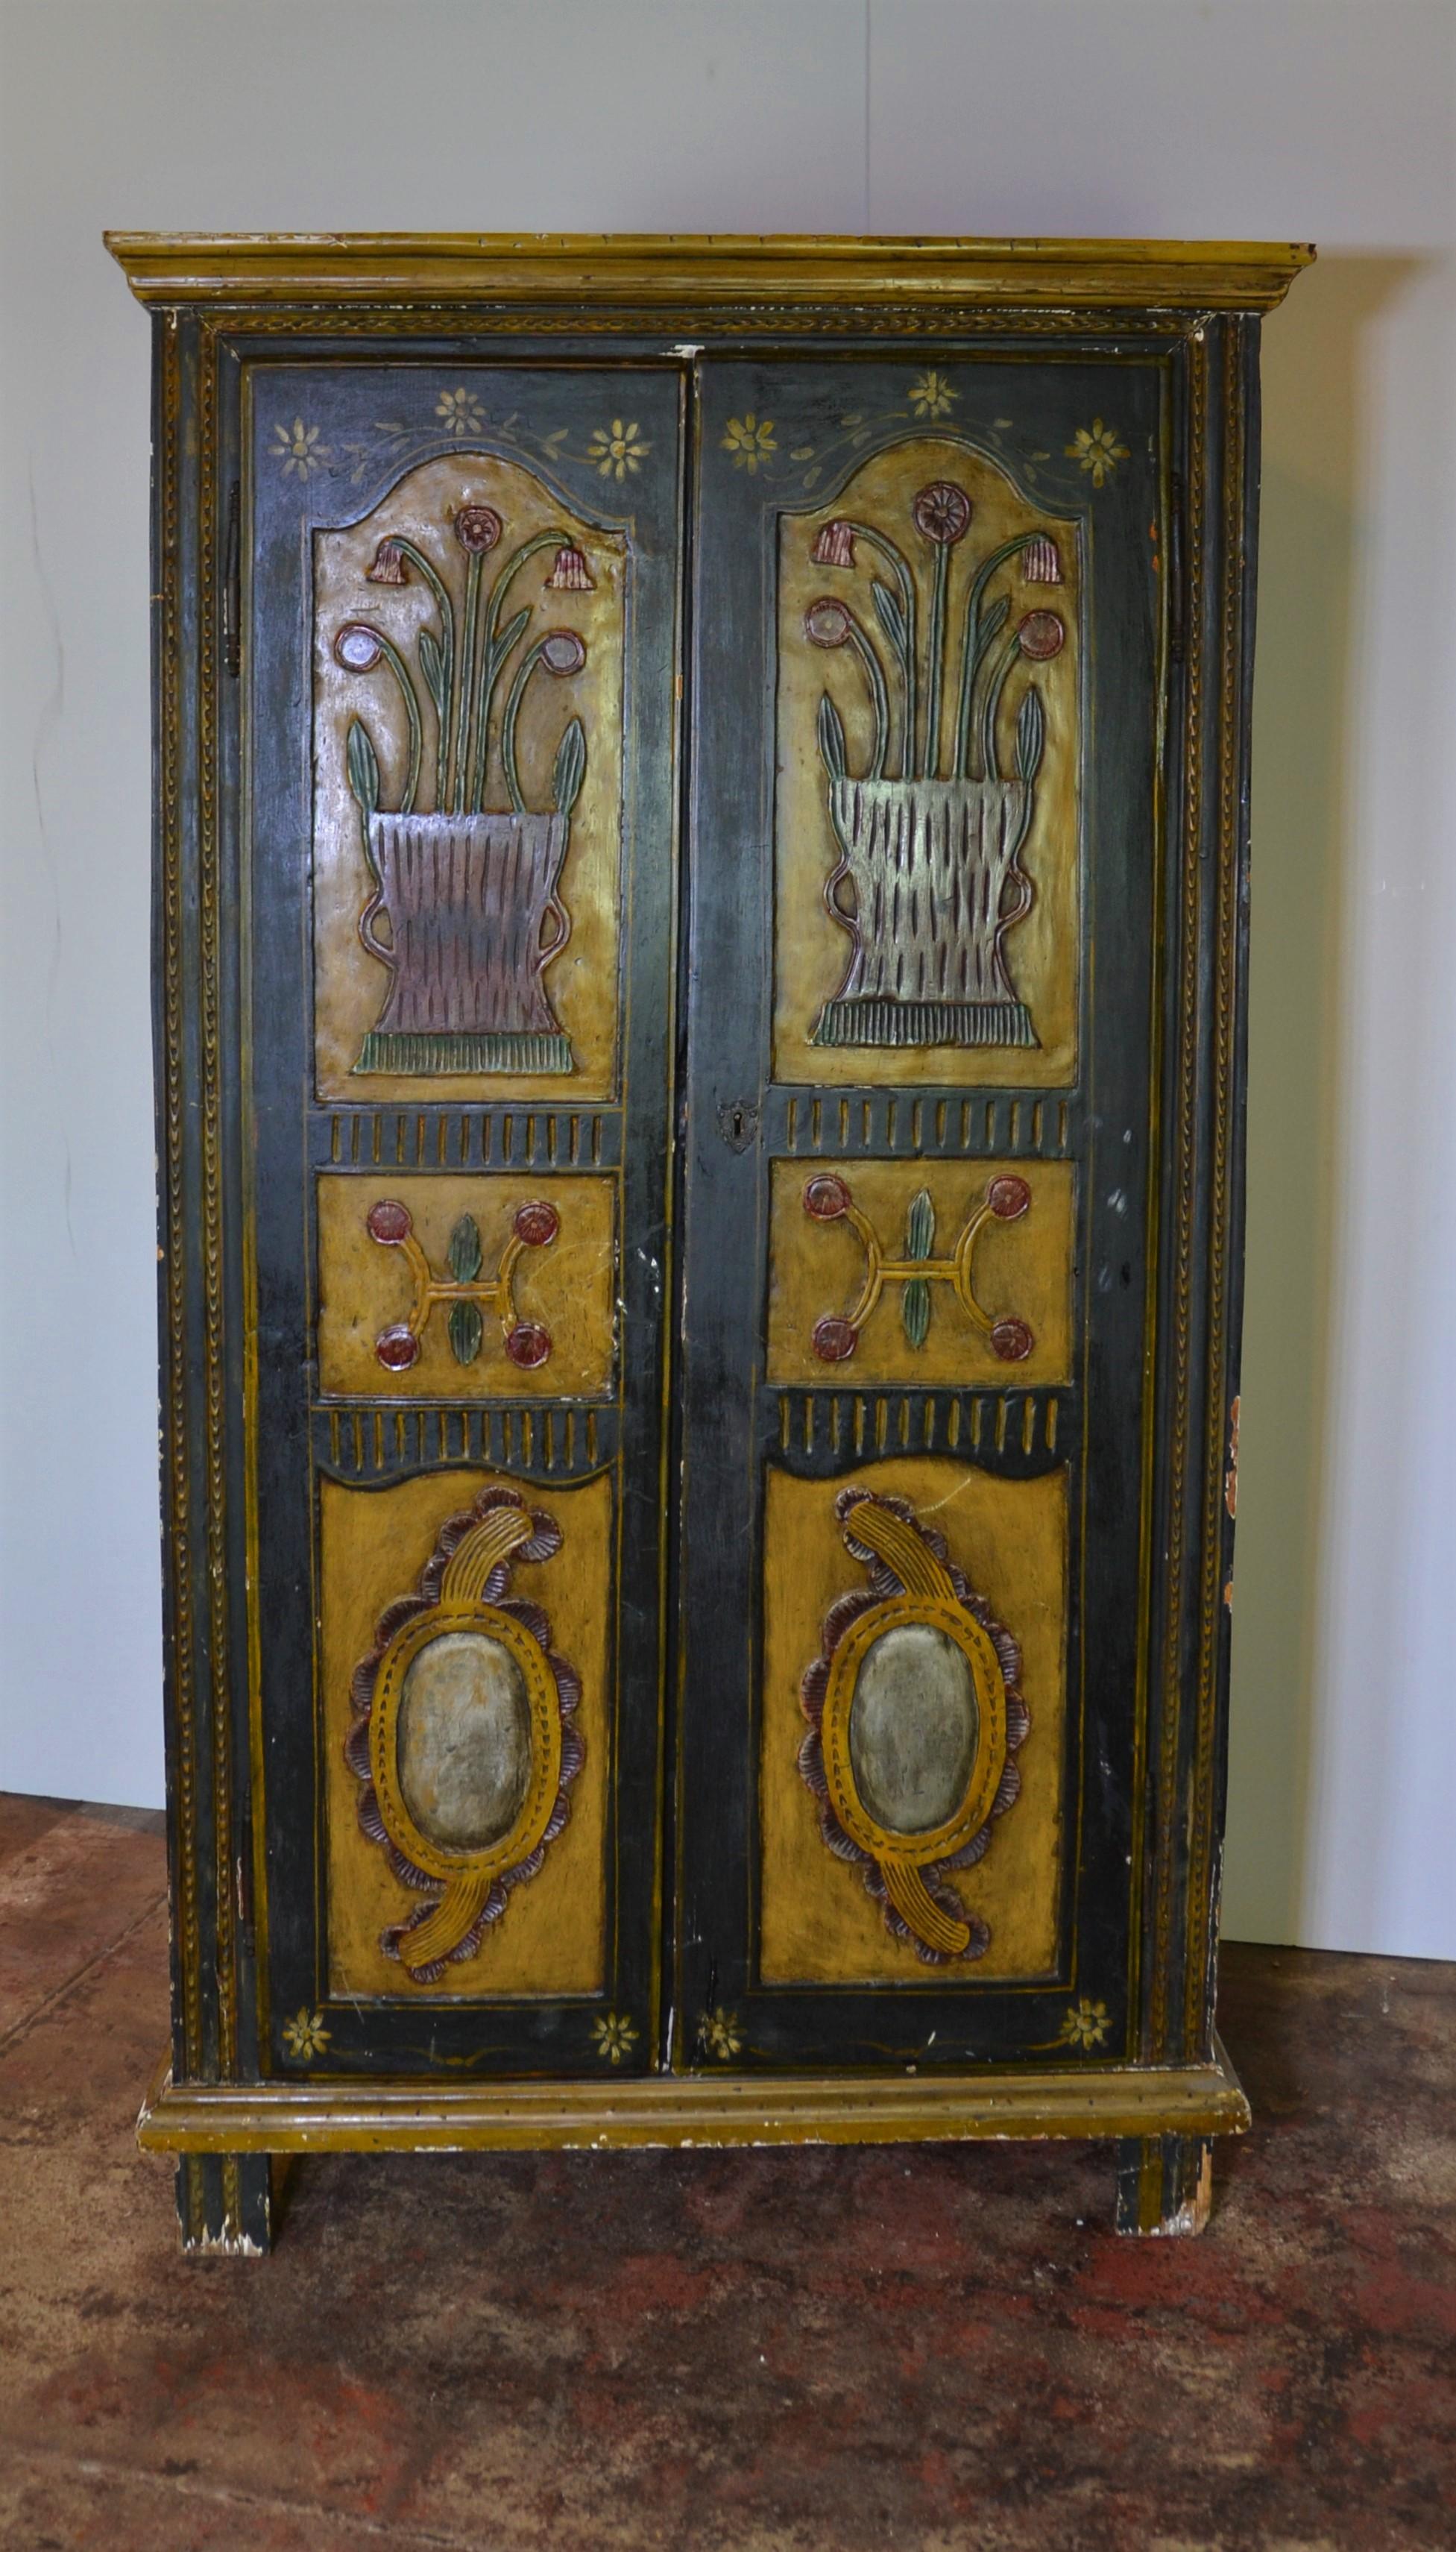 A Continental European armoire / cabinet with raised and painted decorations throughout. Various embossed motifs including urns and flowers done in an artistic style, 18th century.